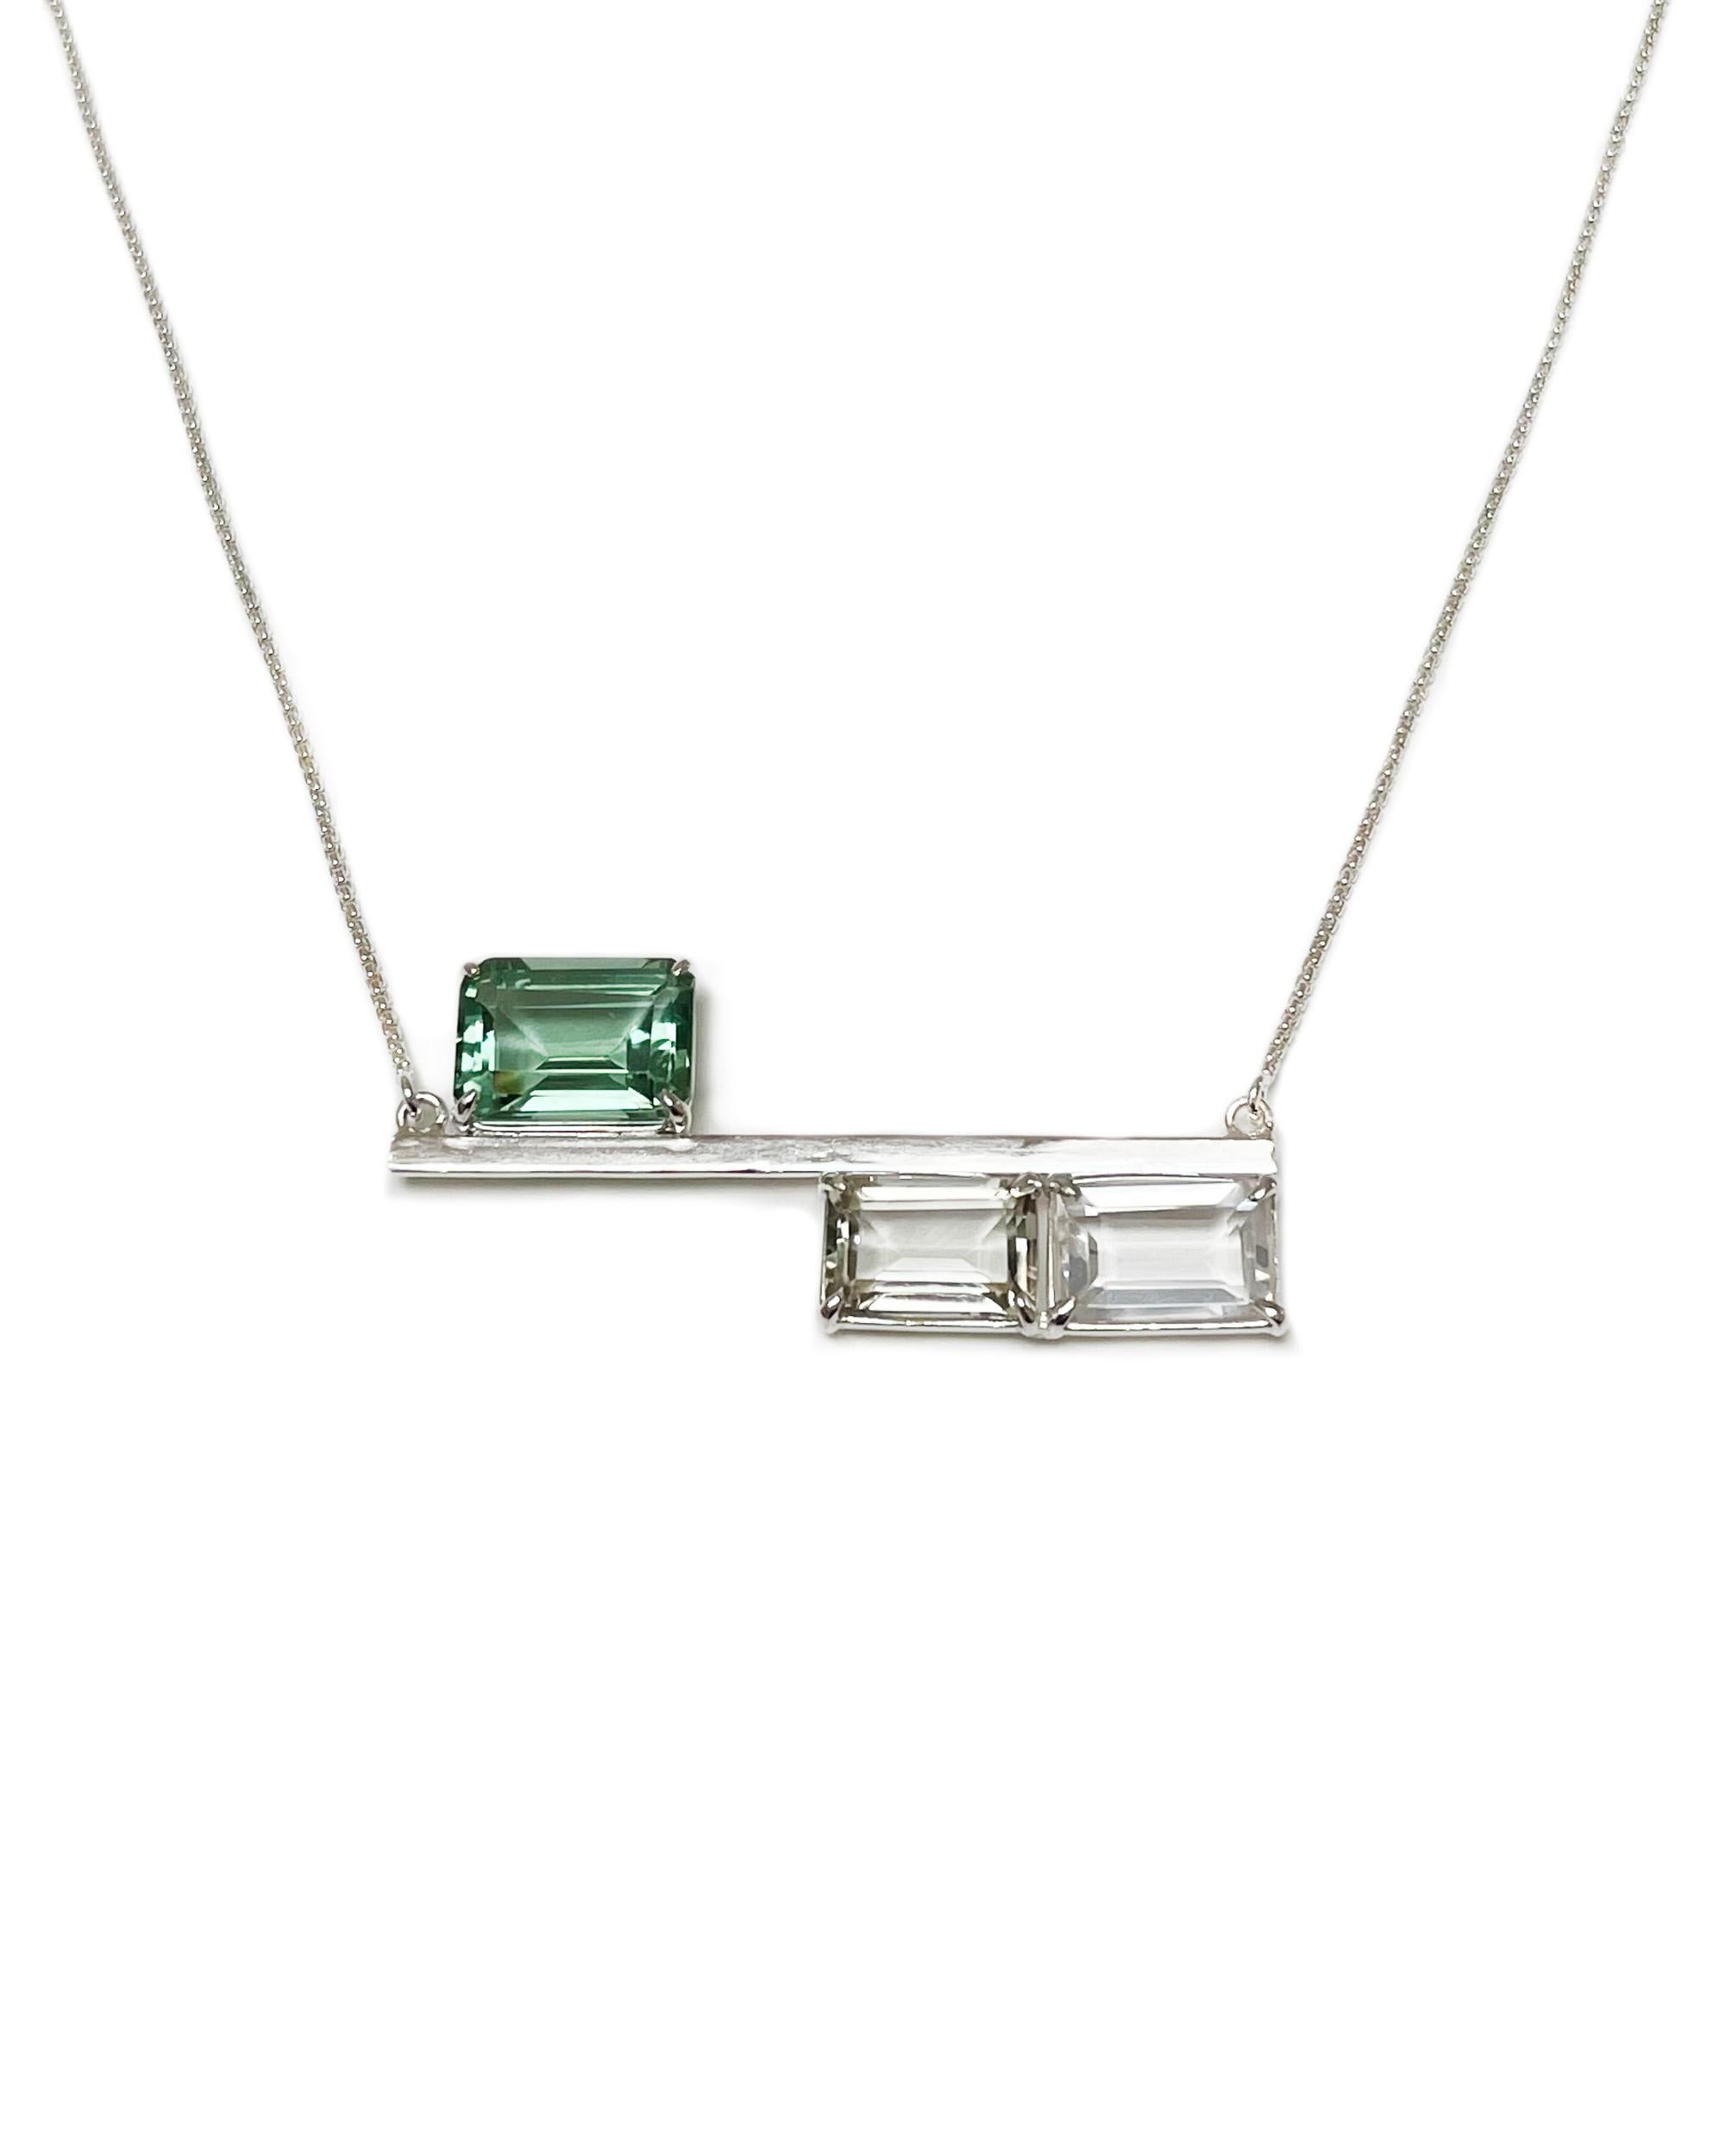 Emerald Cut Balance Necklace in Green Quartz, Prasiolite, White Topaz and Sterling Silver For Sale